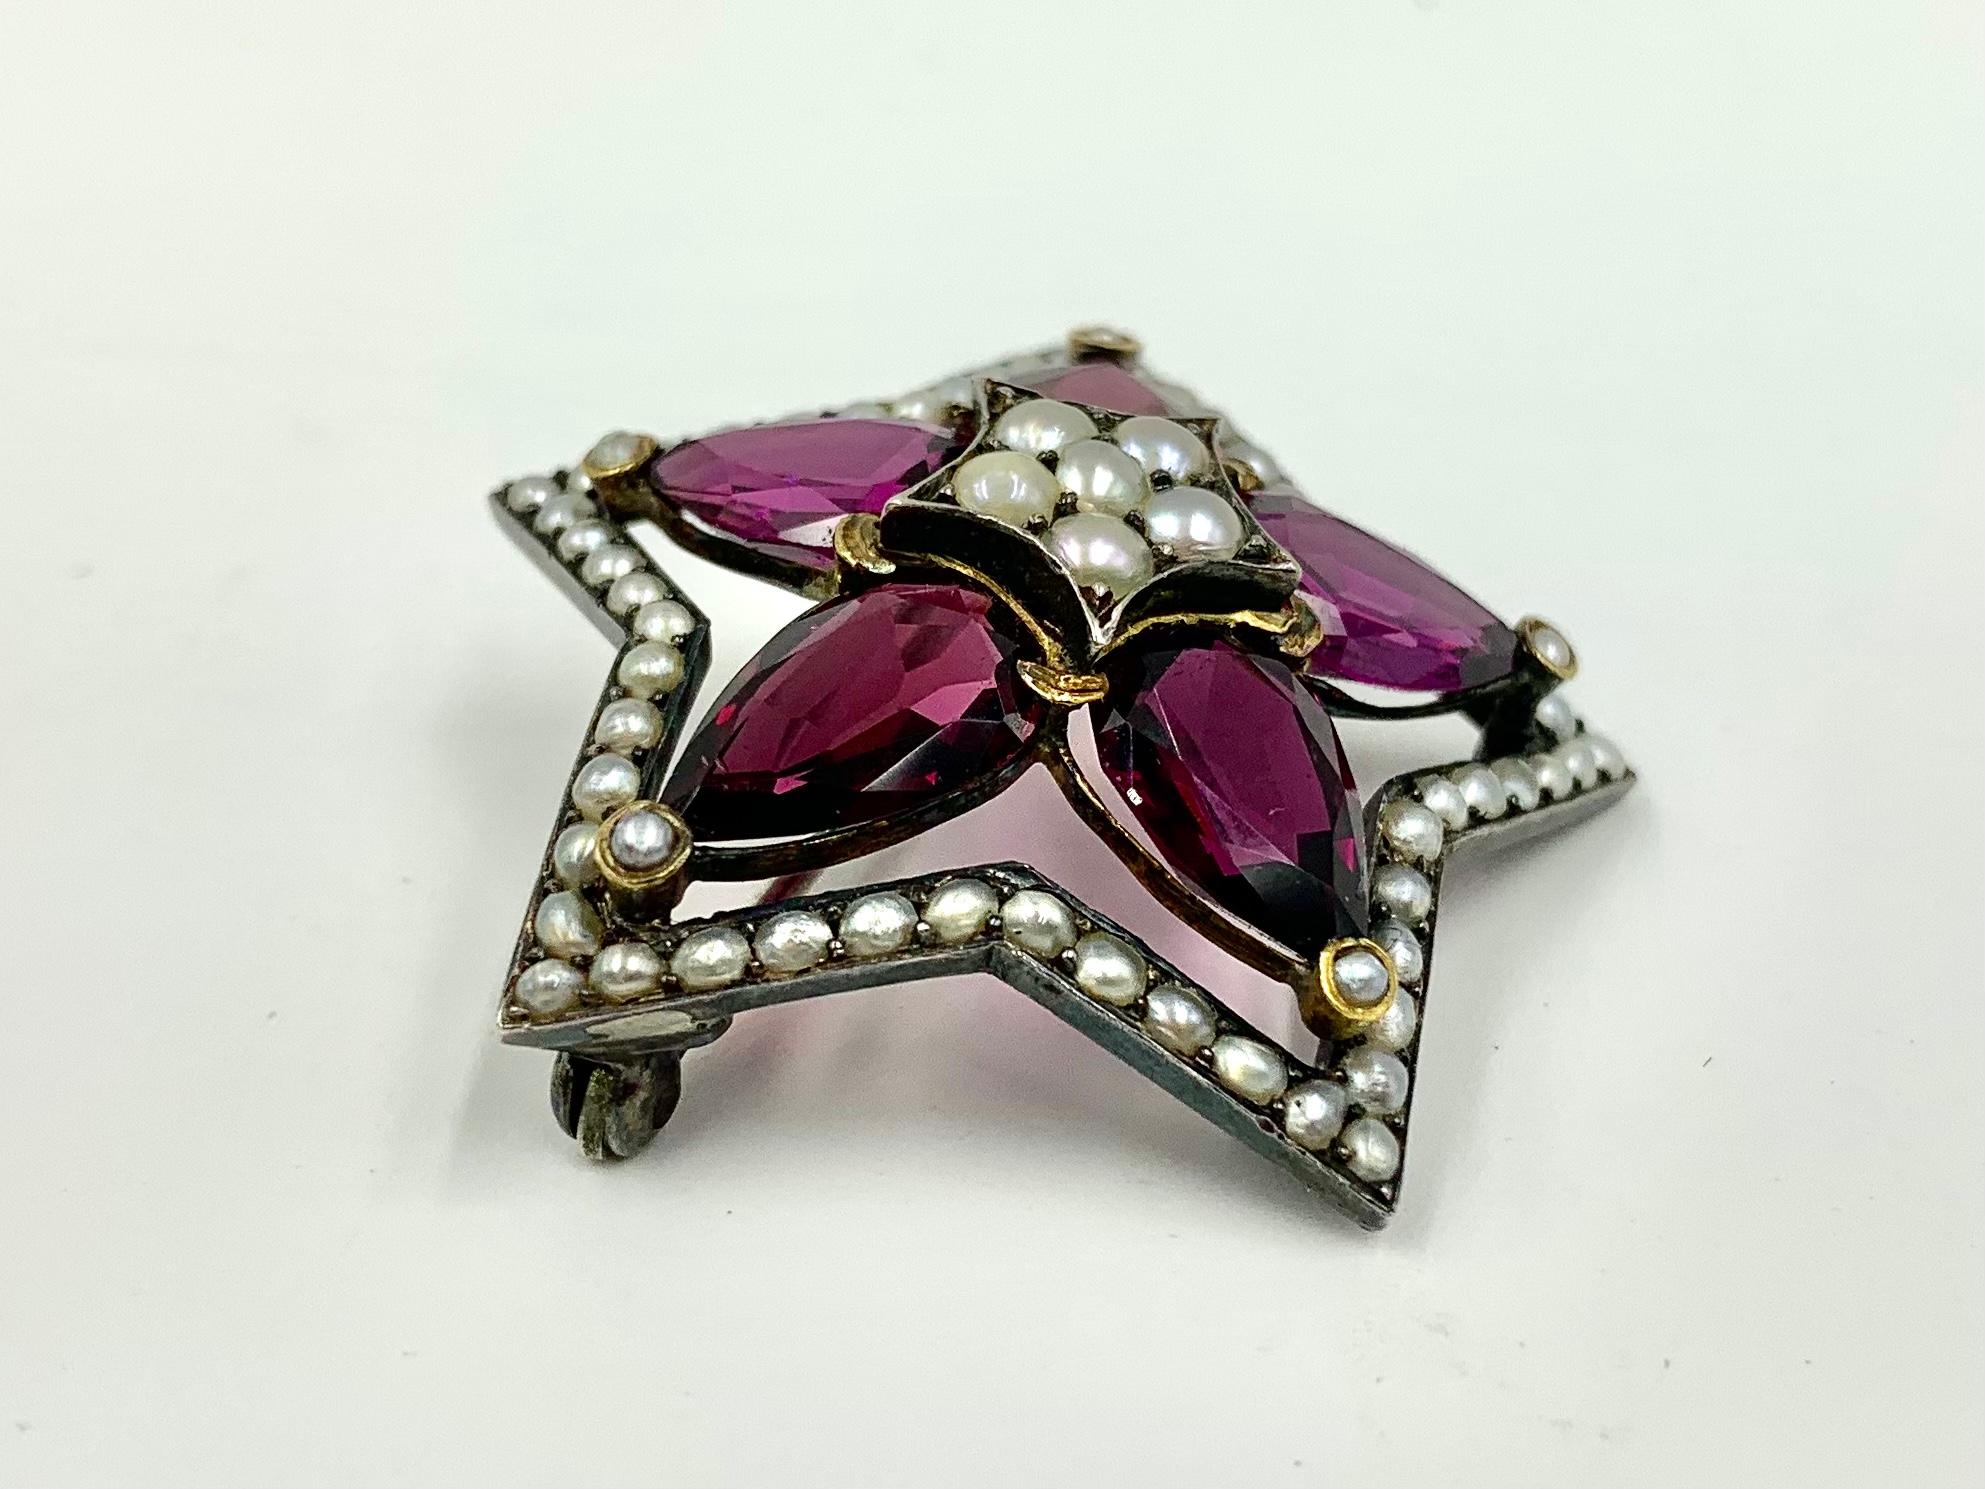 11 TCW Large Pear Shaped Rhodolite Garnet 18K Gold, Silver, Pearl Star Brooch In Good Condition For Sale In New York, NY